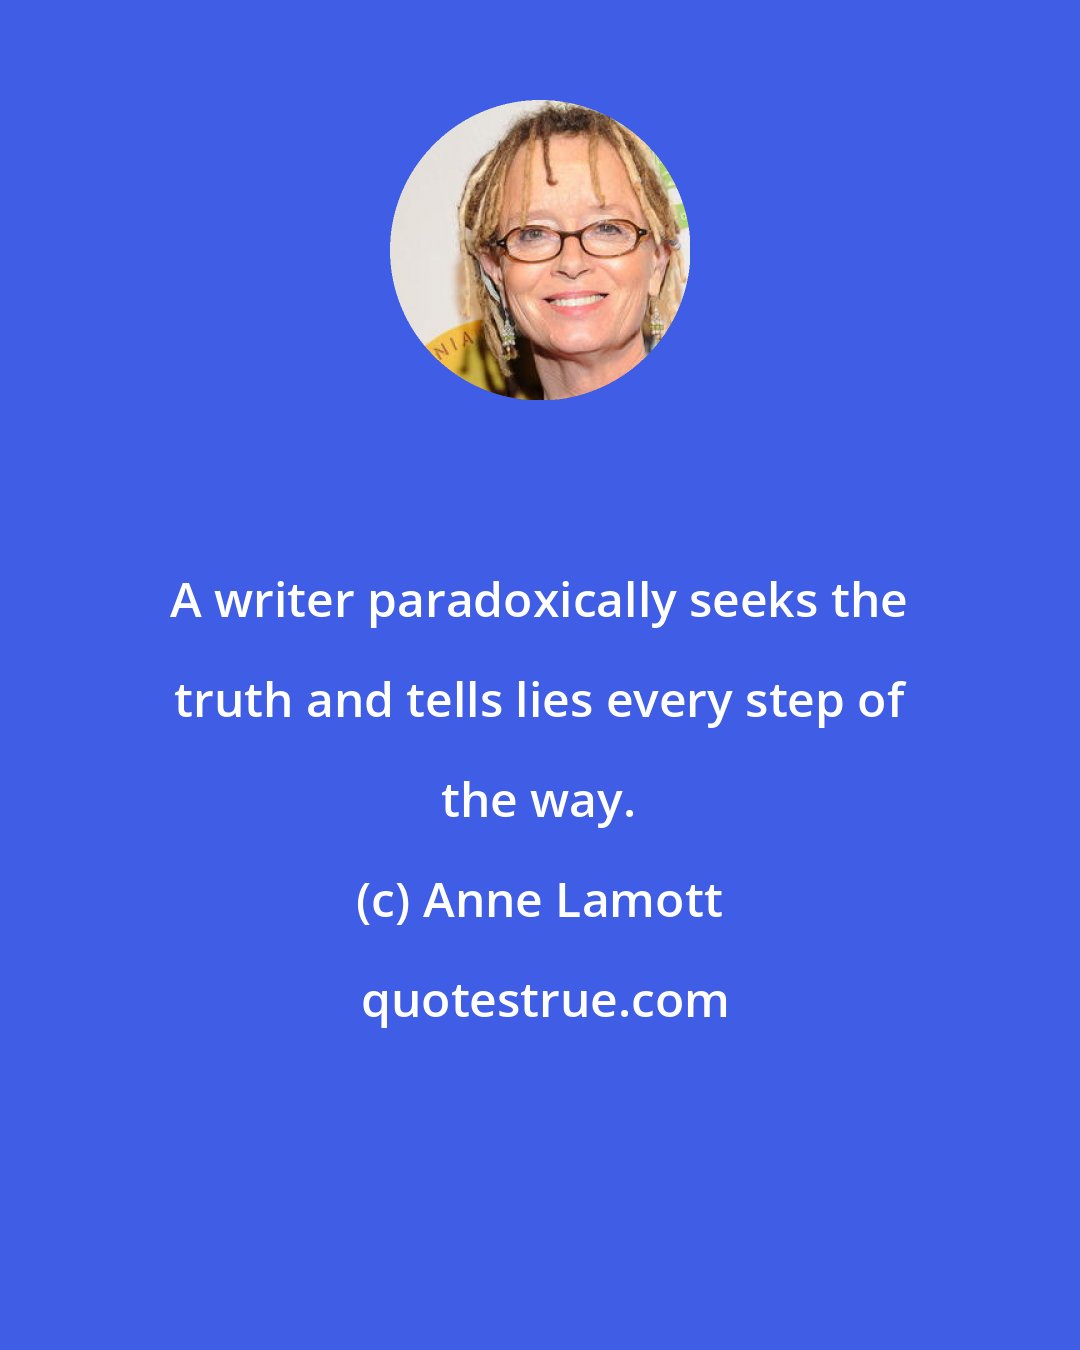 Anne Lamott: A writer paradoxically seeks the truth and tells lies every step of the way.